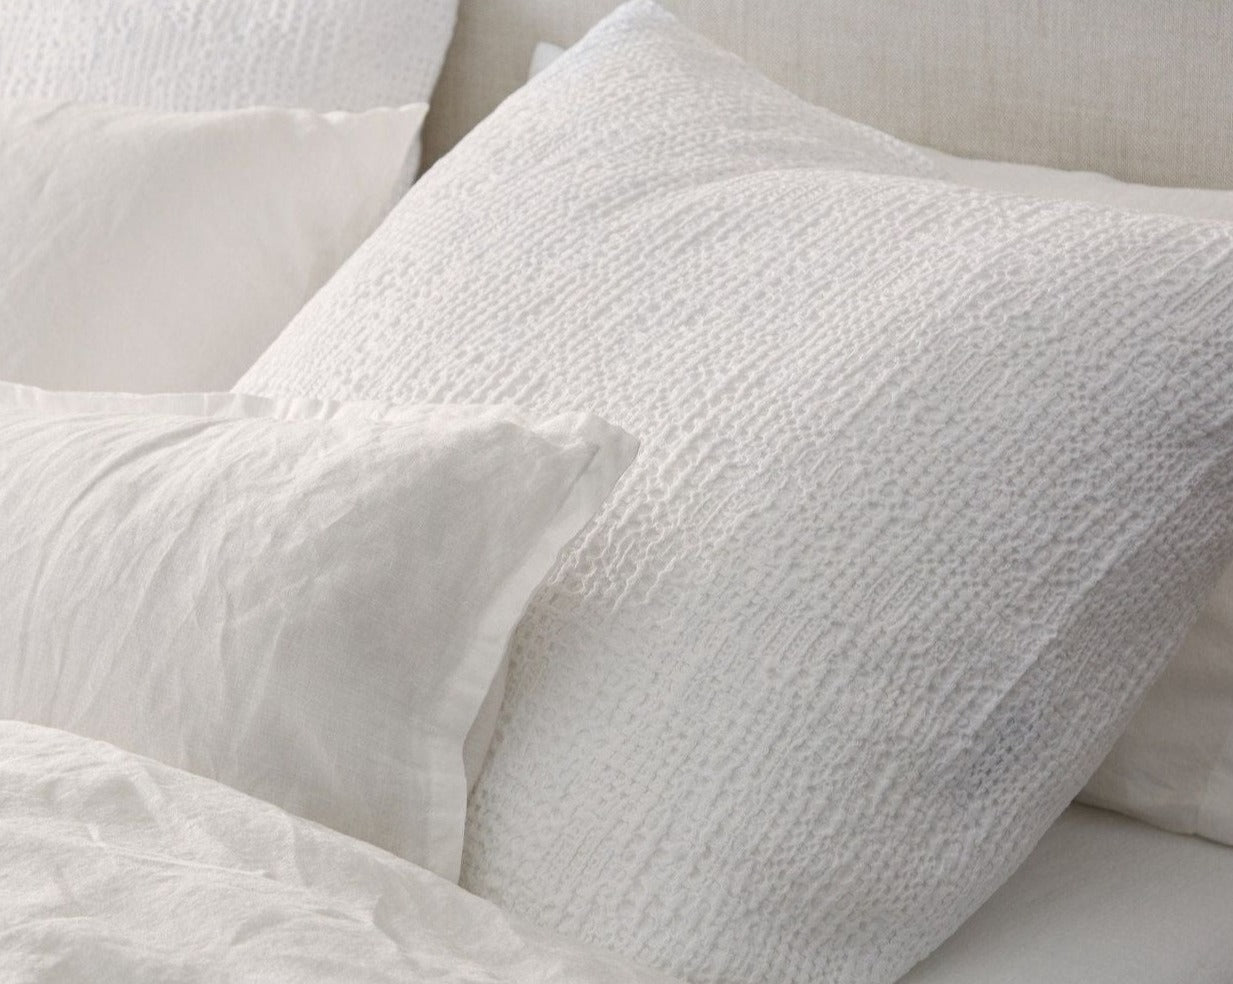 Pillow shams from Resthouse Sleep Solutions